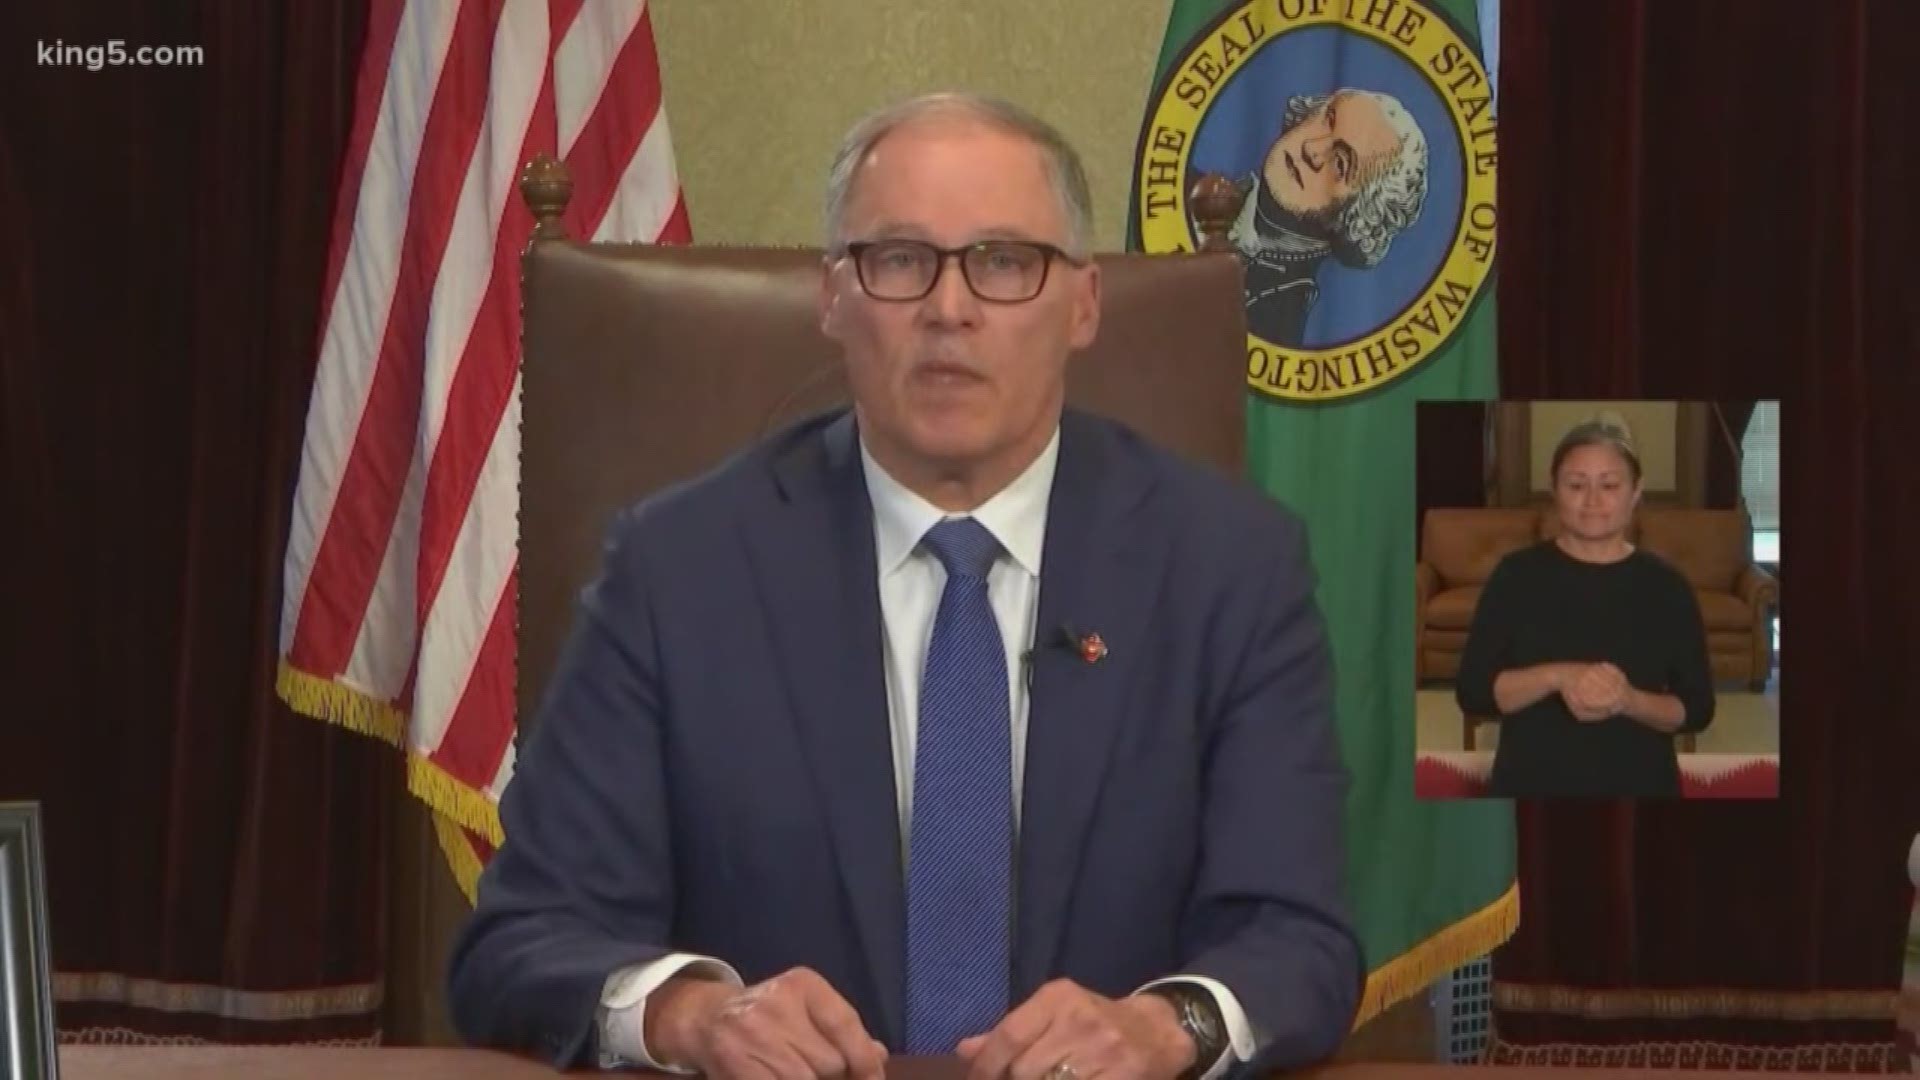 Gov. Jay Inslee has announced a two-week stay-home order, shutting down non-essential work places and banning gatherings for two weeks. People can still go outside.